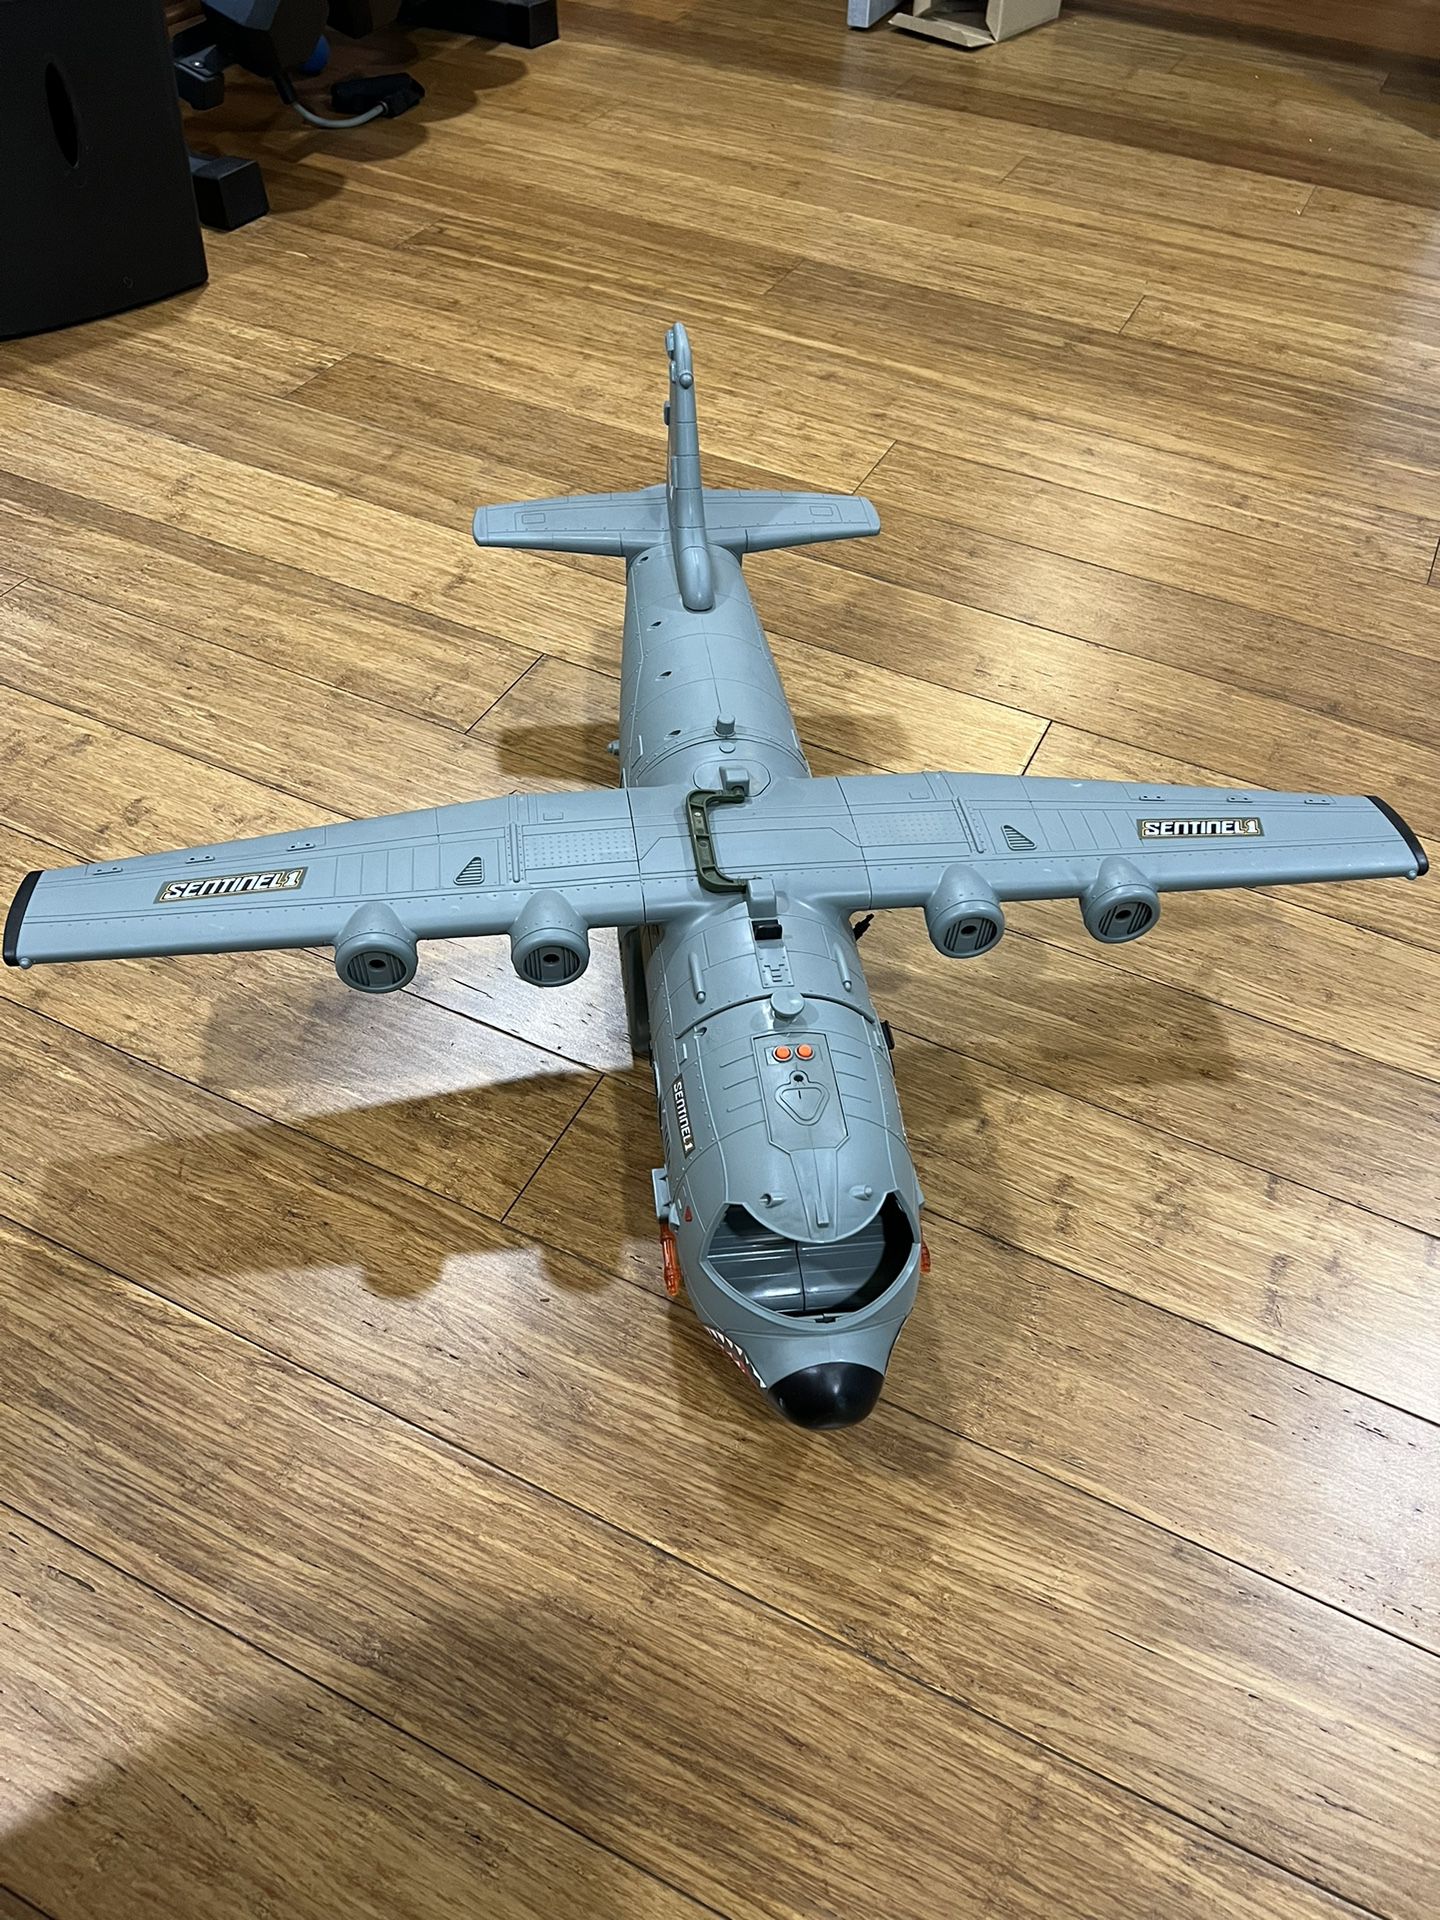 Big C-130 Toy Airplane. It’s Missing It’s Props And Sunshield. 